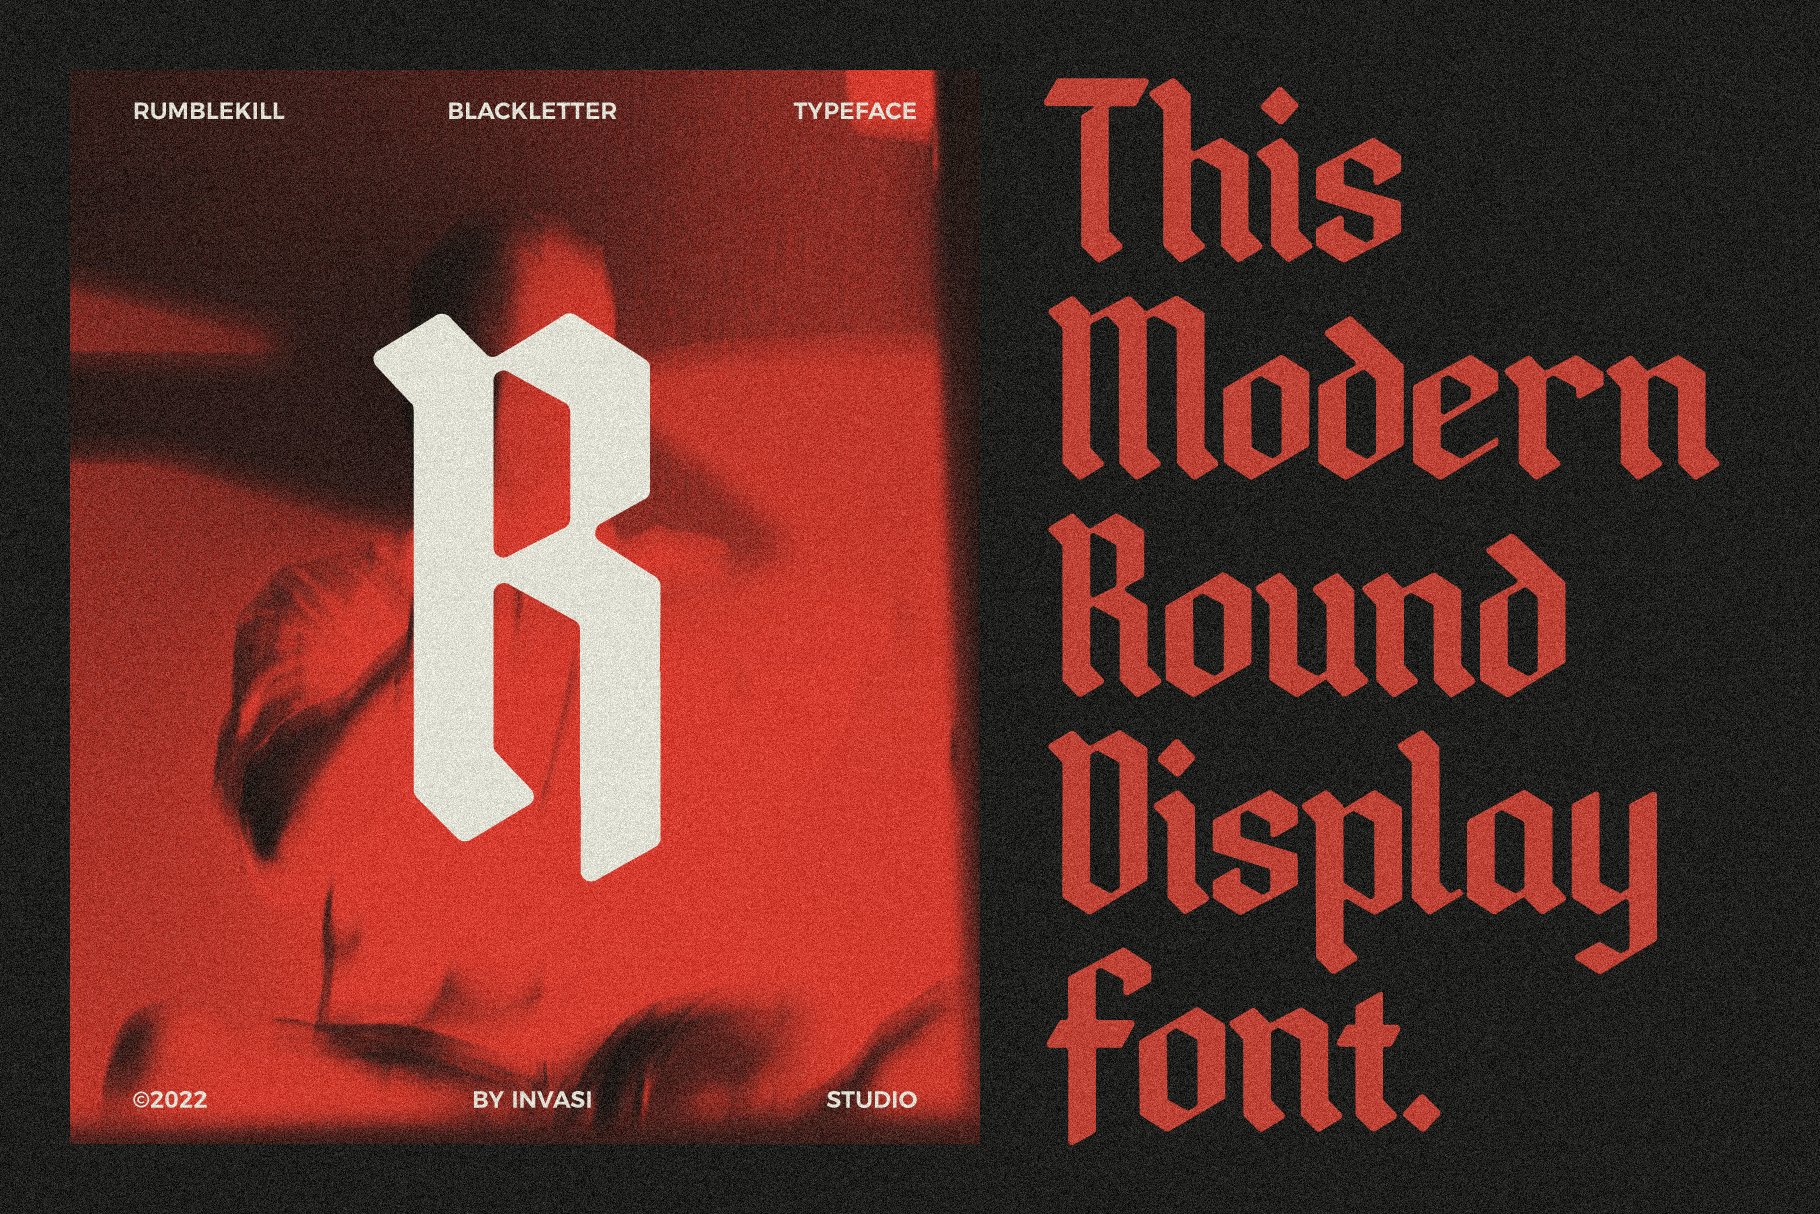 Rumblekill - Rounded Blackletter preview image.